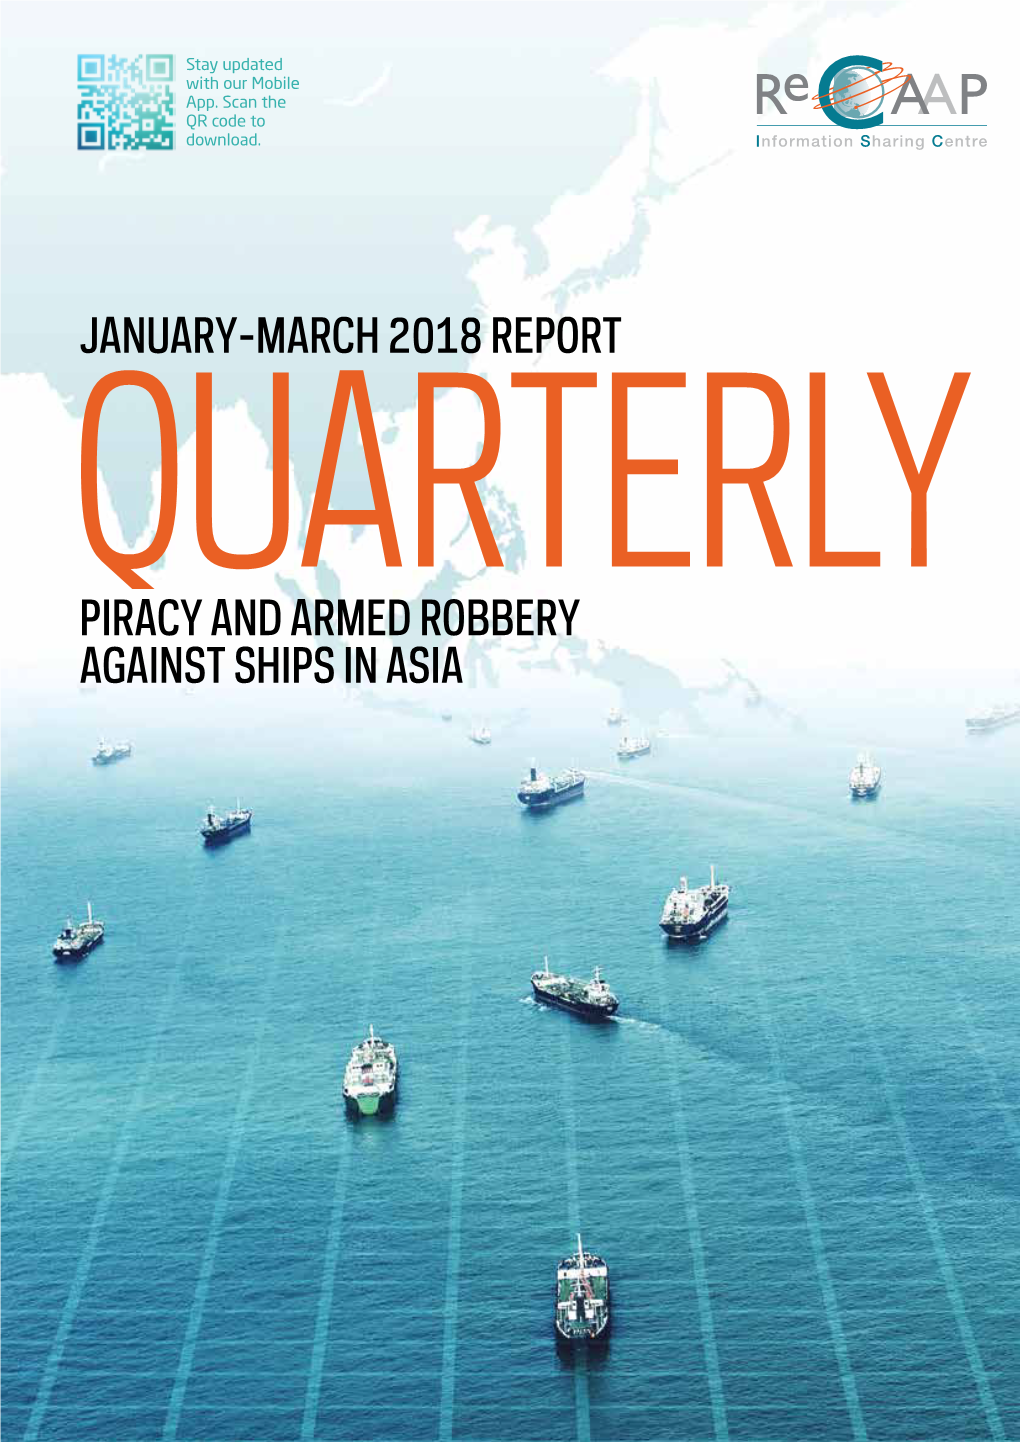 January-March 2018 Report Piracy and Armed Robbery Against Ships in Asia